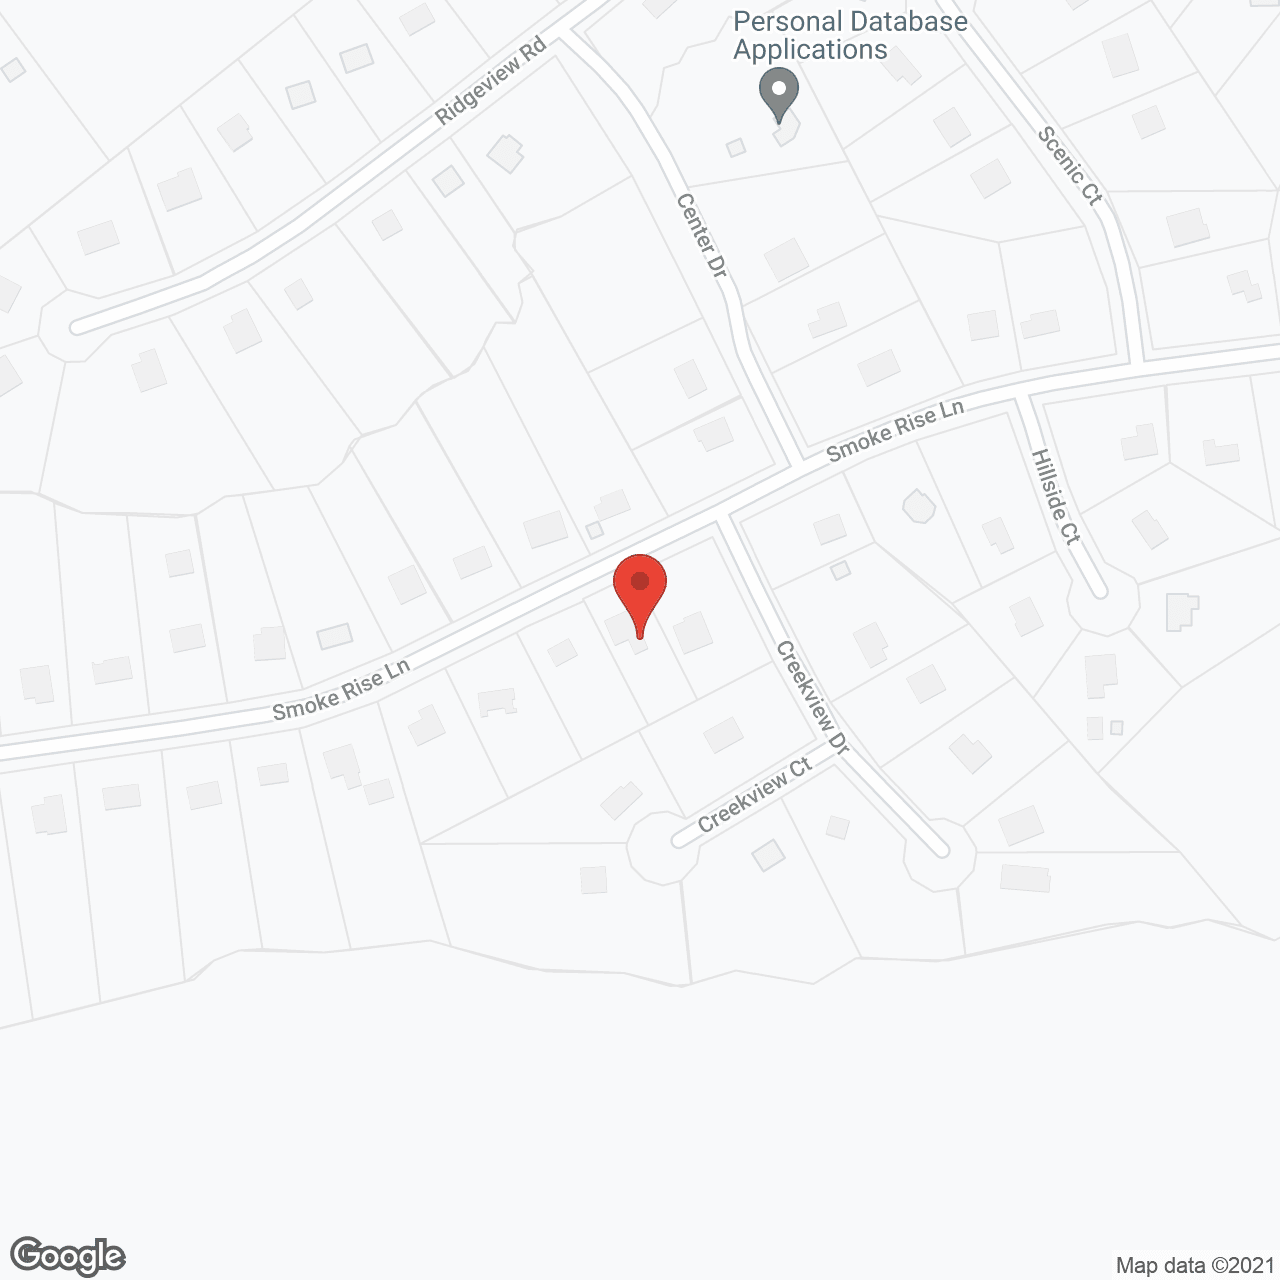 Maria's Warm  Home in google map